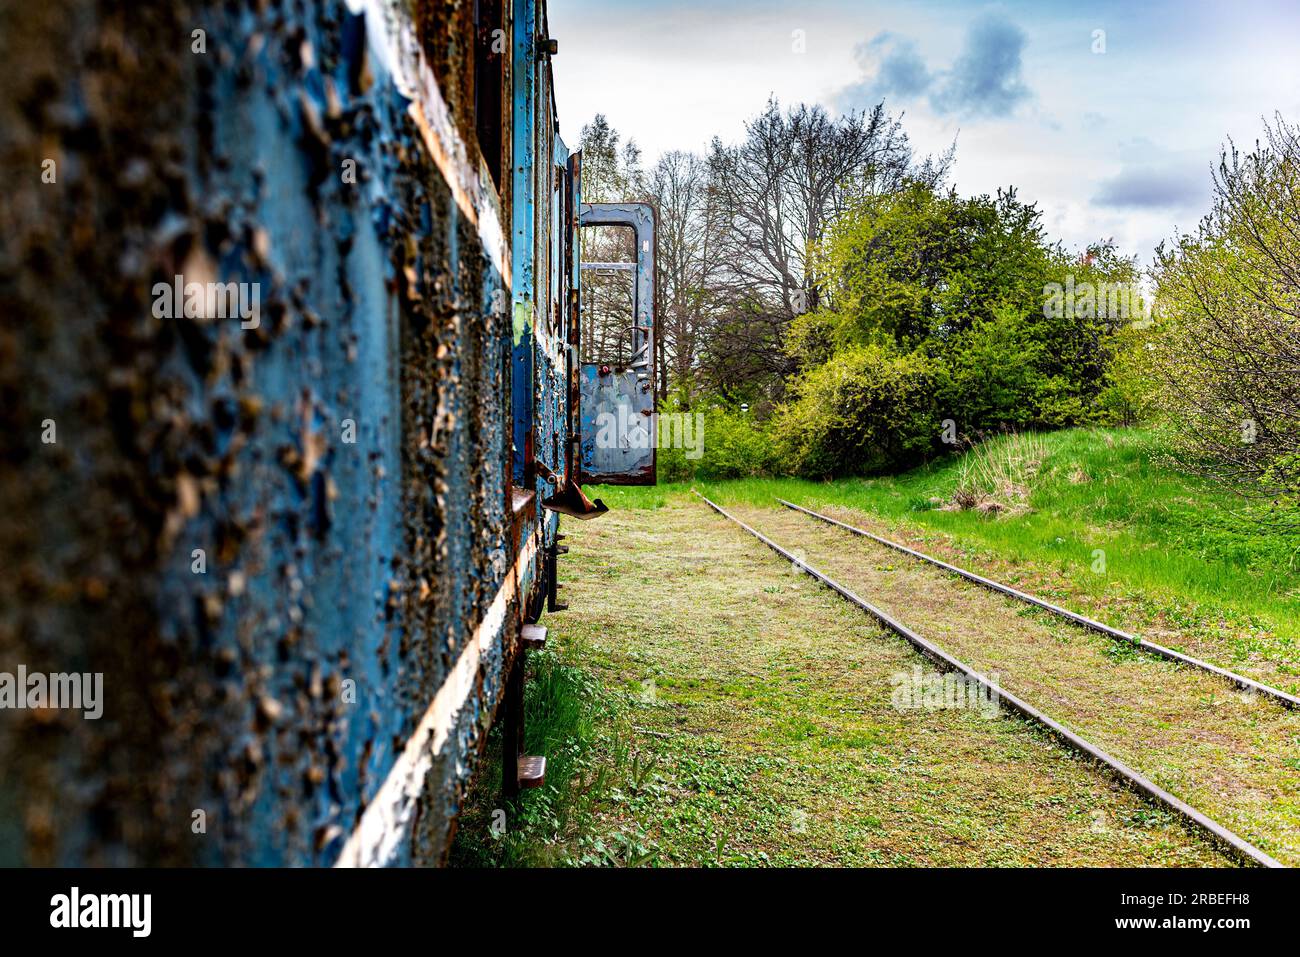 Perpective shot of old passenger electric multiple train wagon, very shallow depth of field Stock Photo